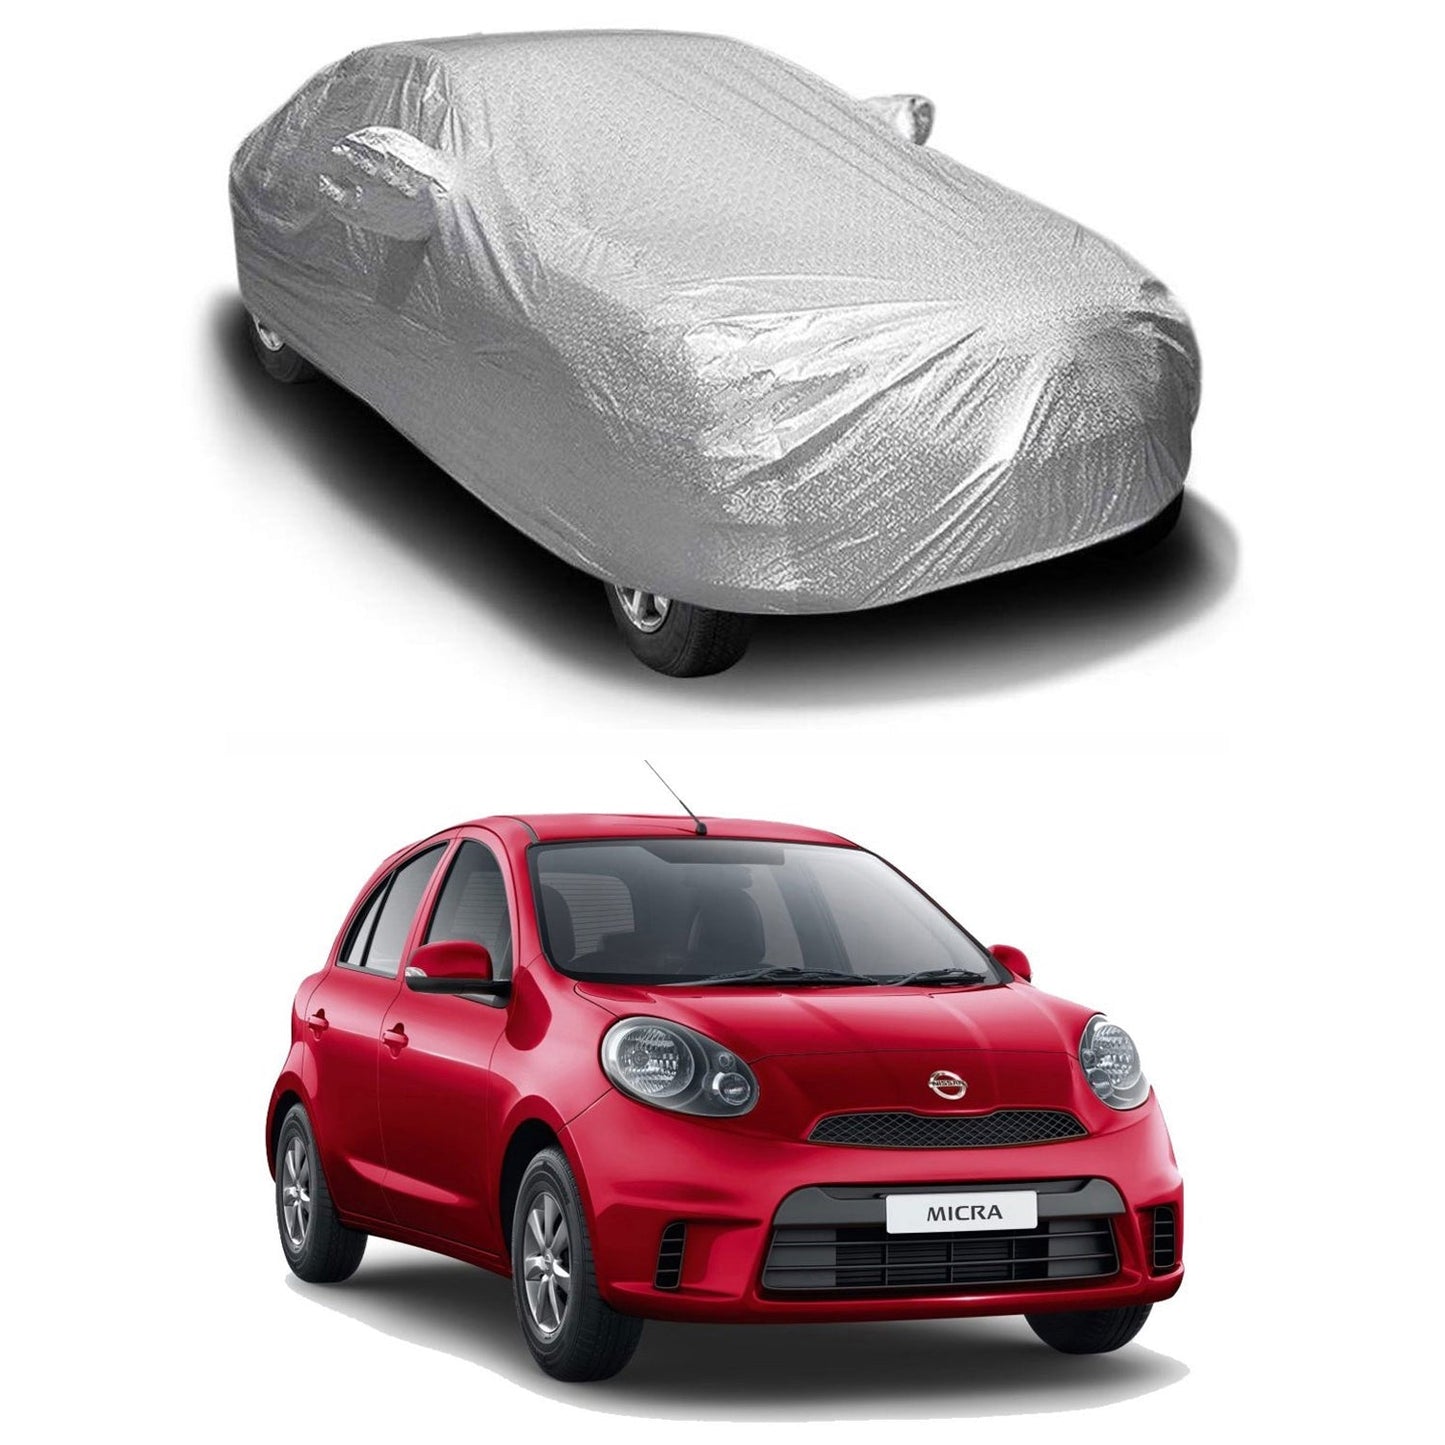 Oshotto Spyro Silver Anti Reflective, dustproof and Water Proof Car Body Cover with Mirror Pockets For Nissan Micra